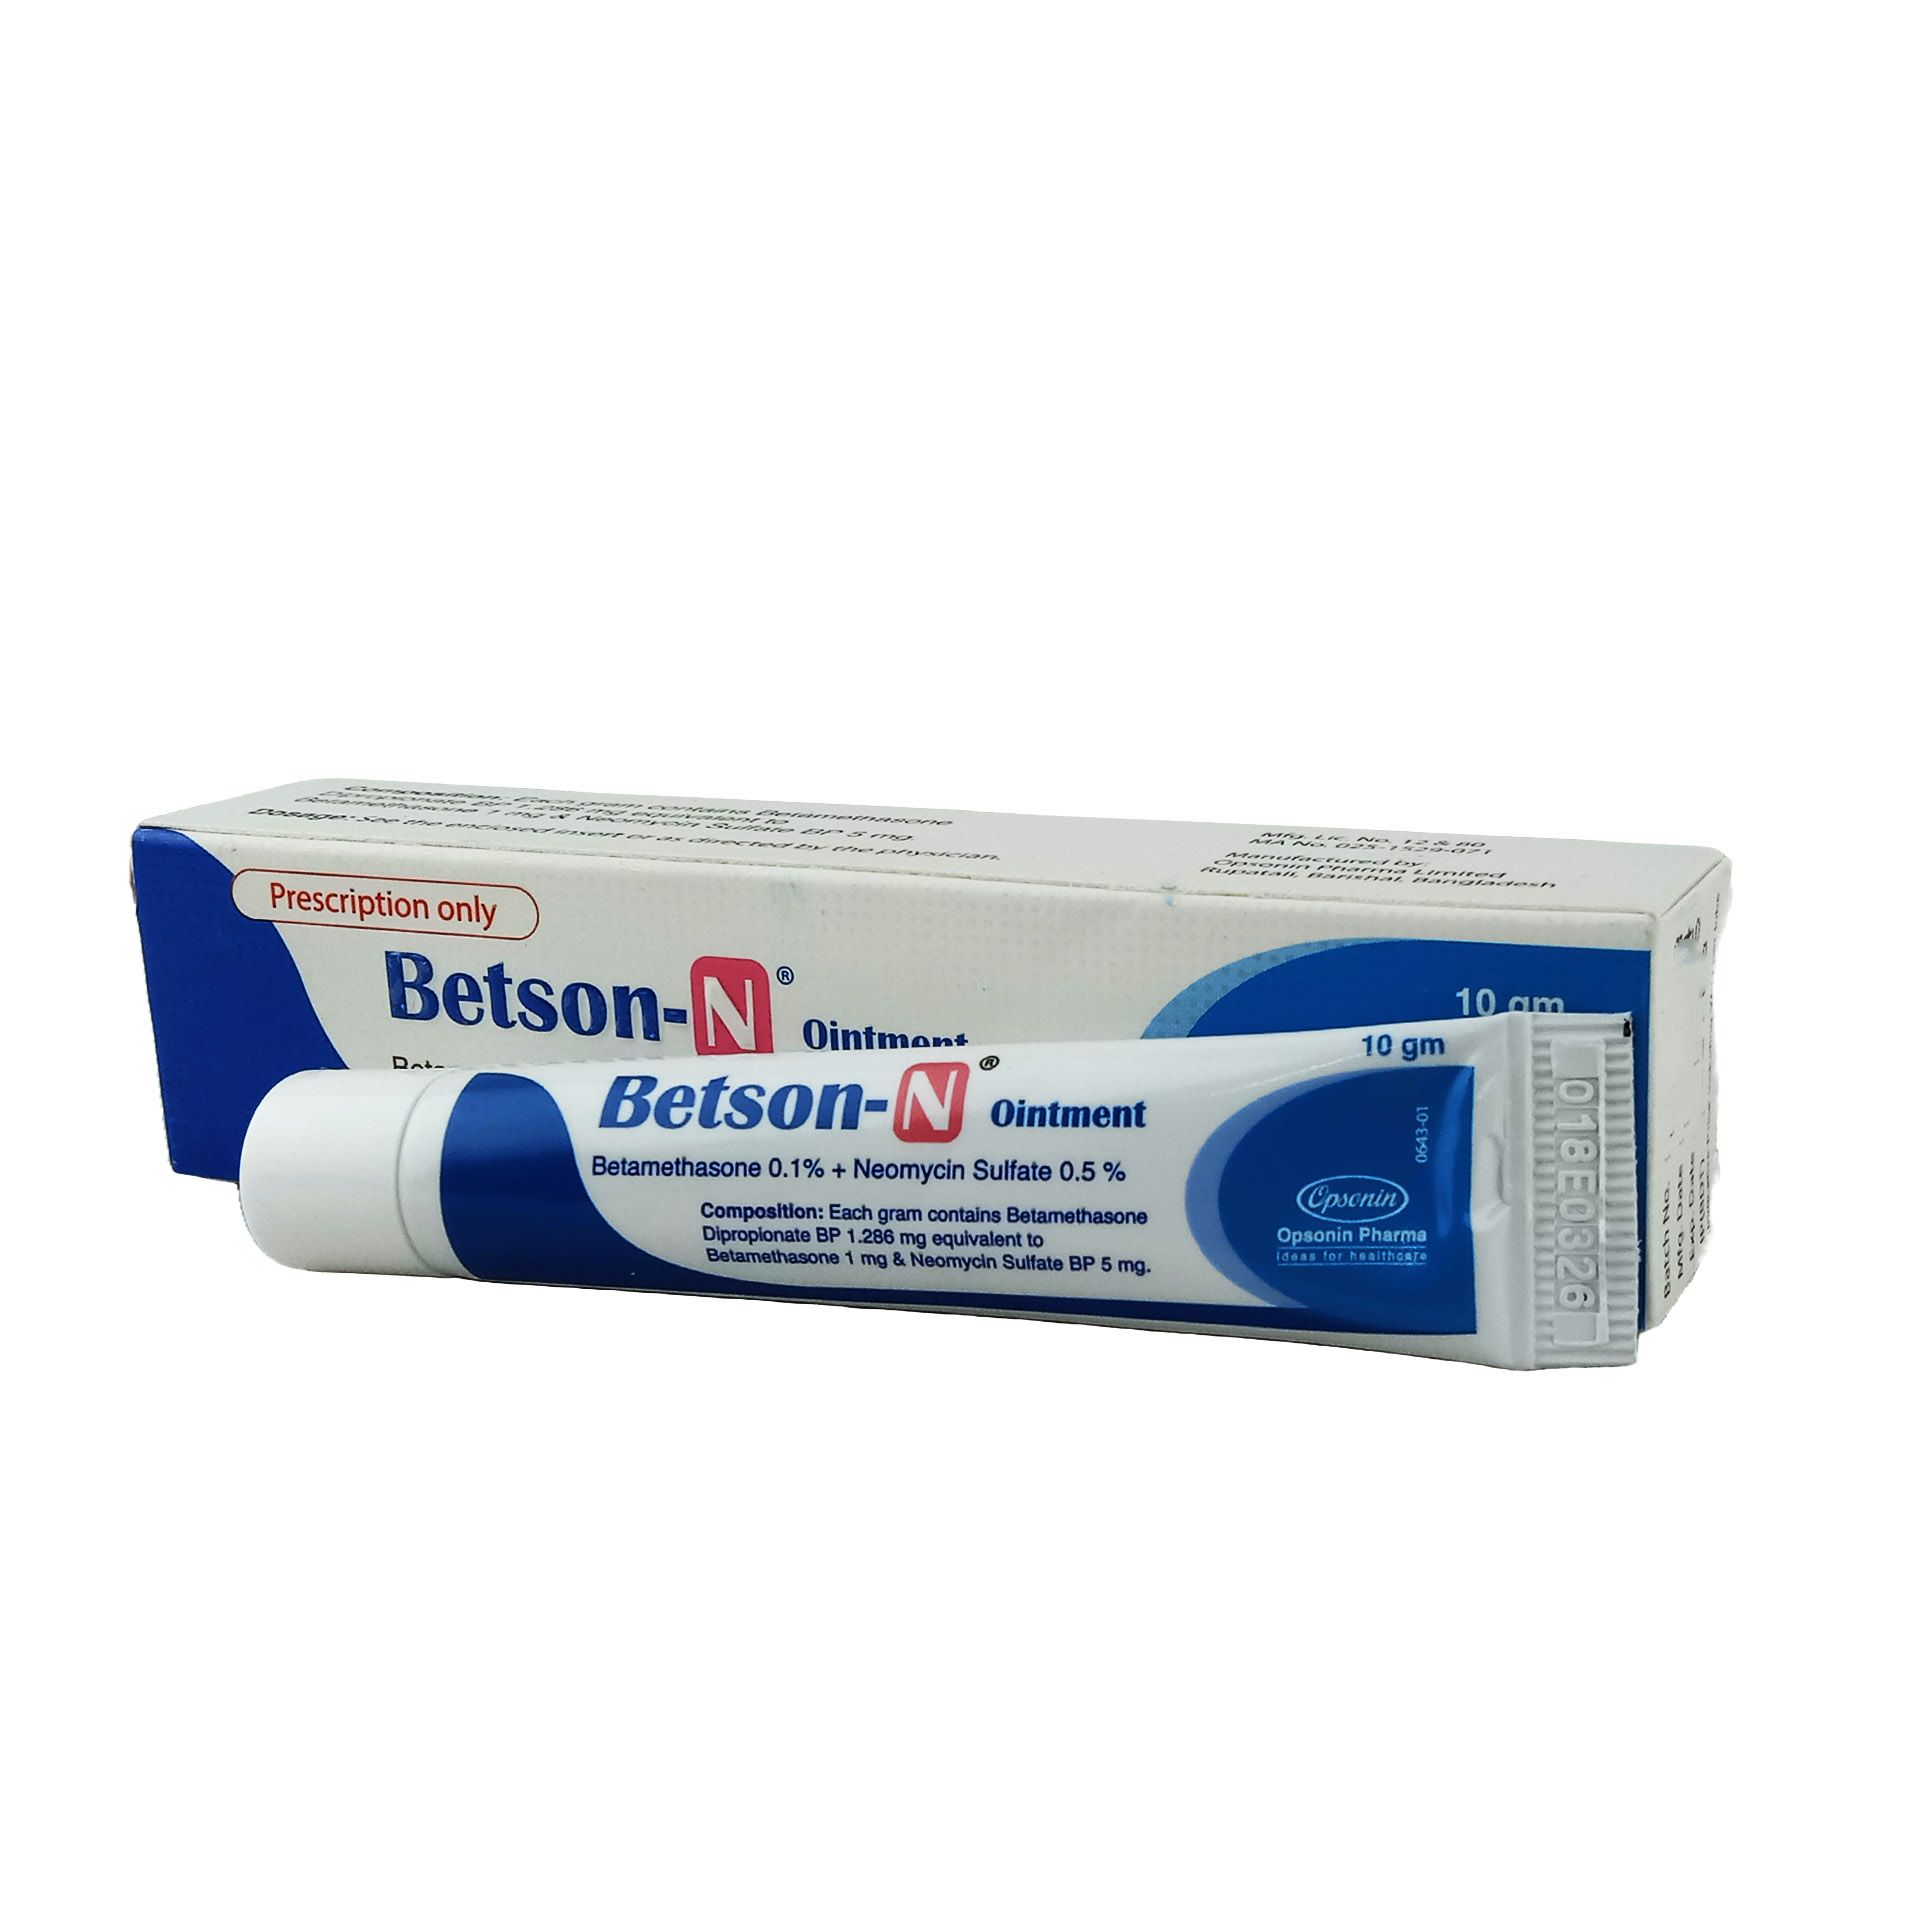 Betson-N 0.1%+0.5% Ointment